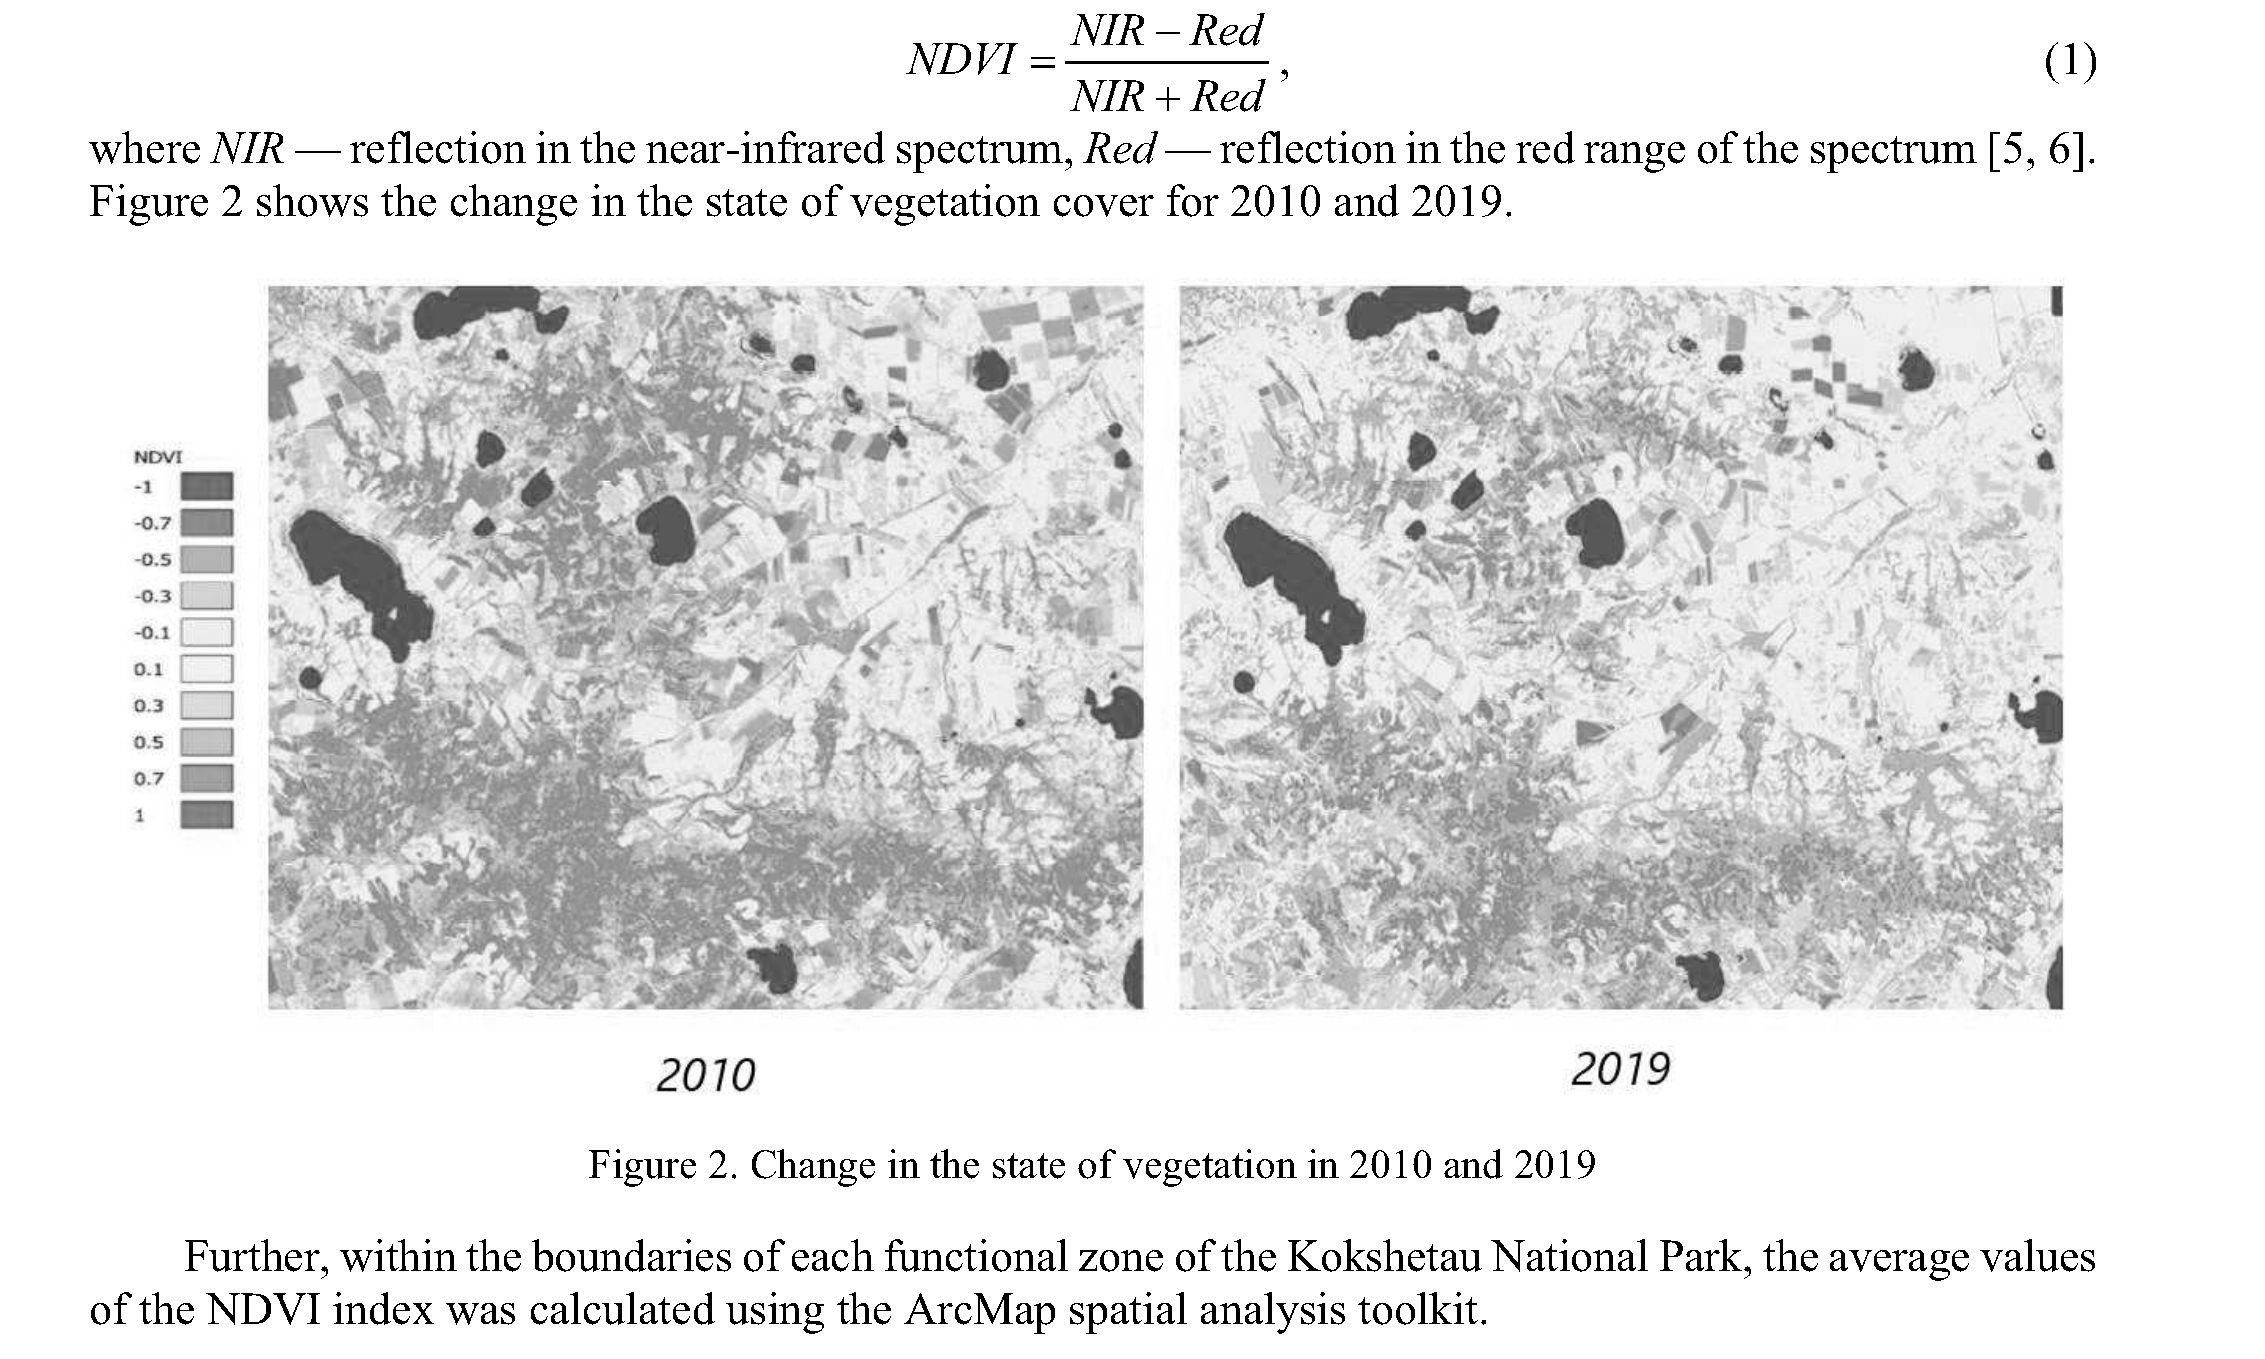 Use of the Earth Remote Sensing Data to assess the state of recreational forests in the Kokshetau National Park